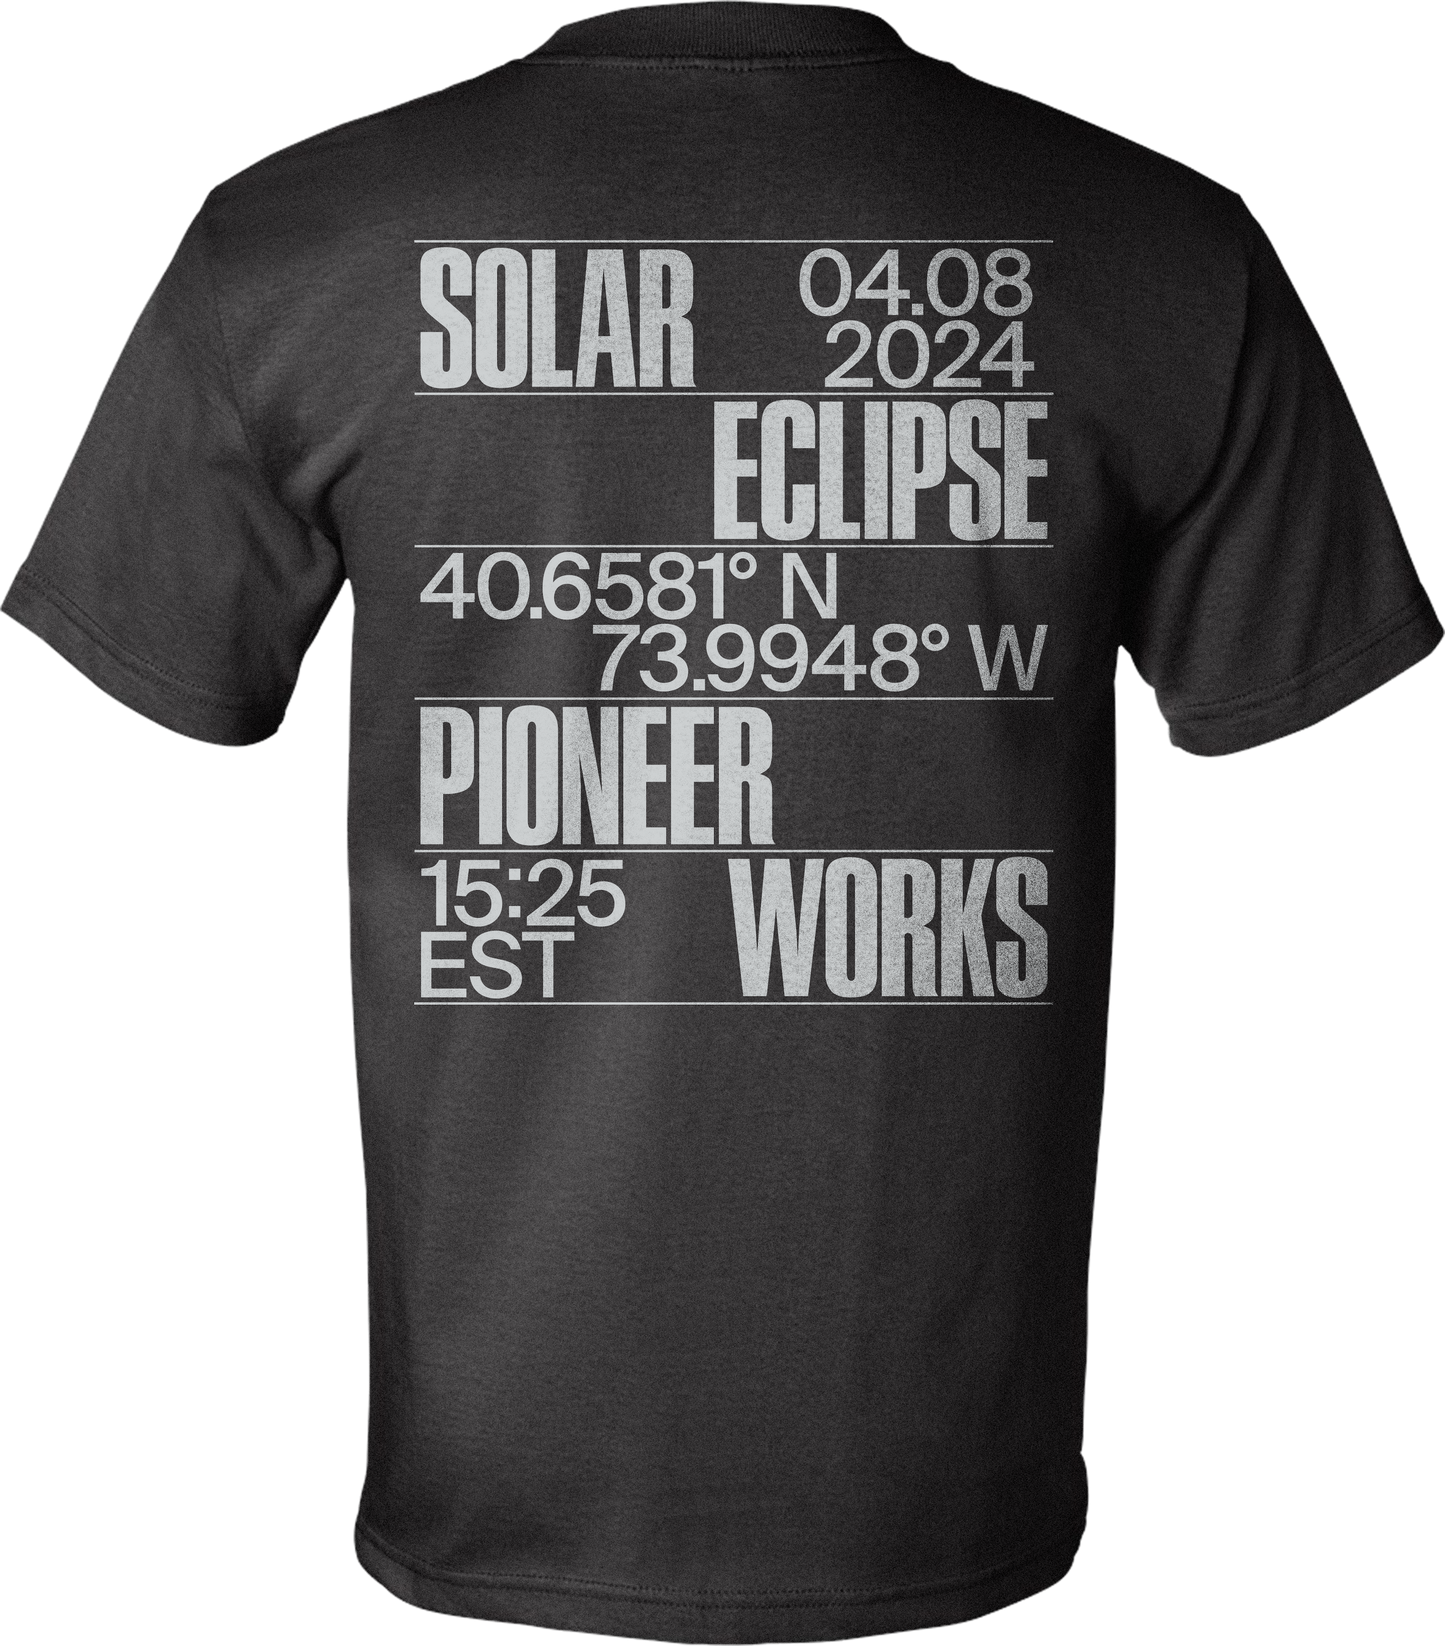 Eclipse in Time T-shirt